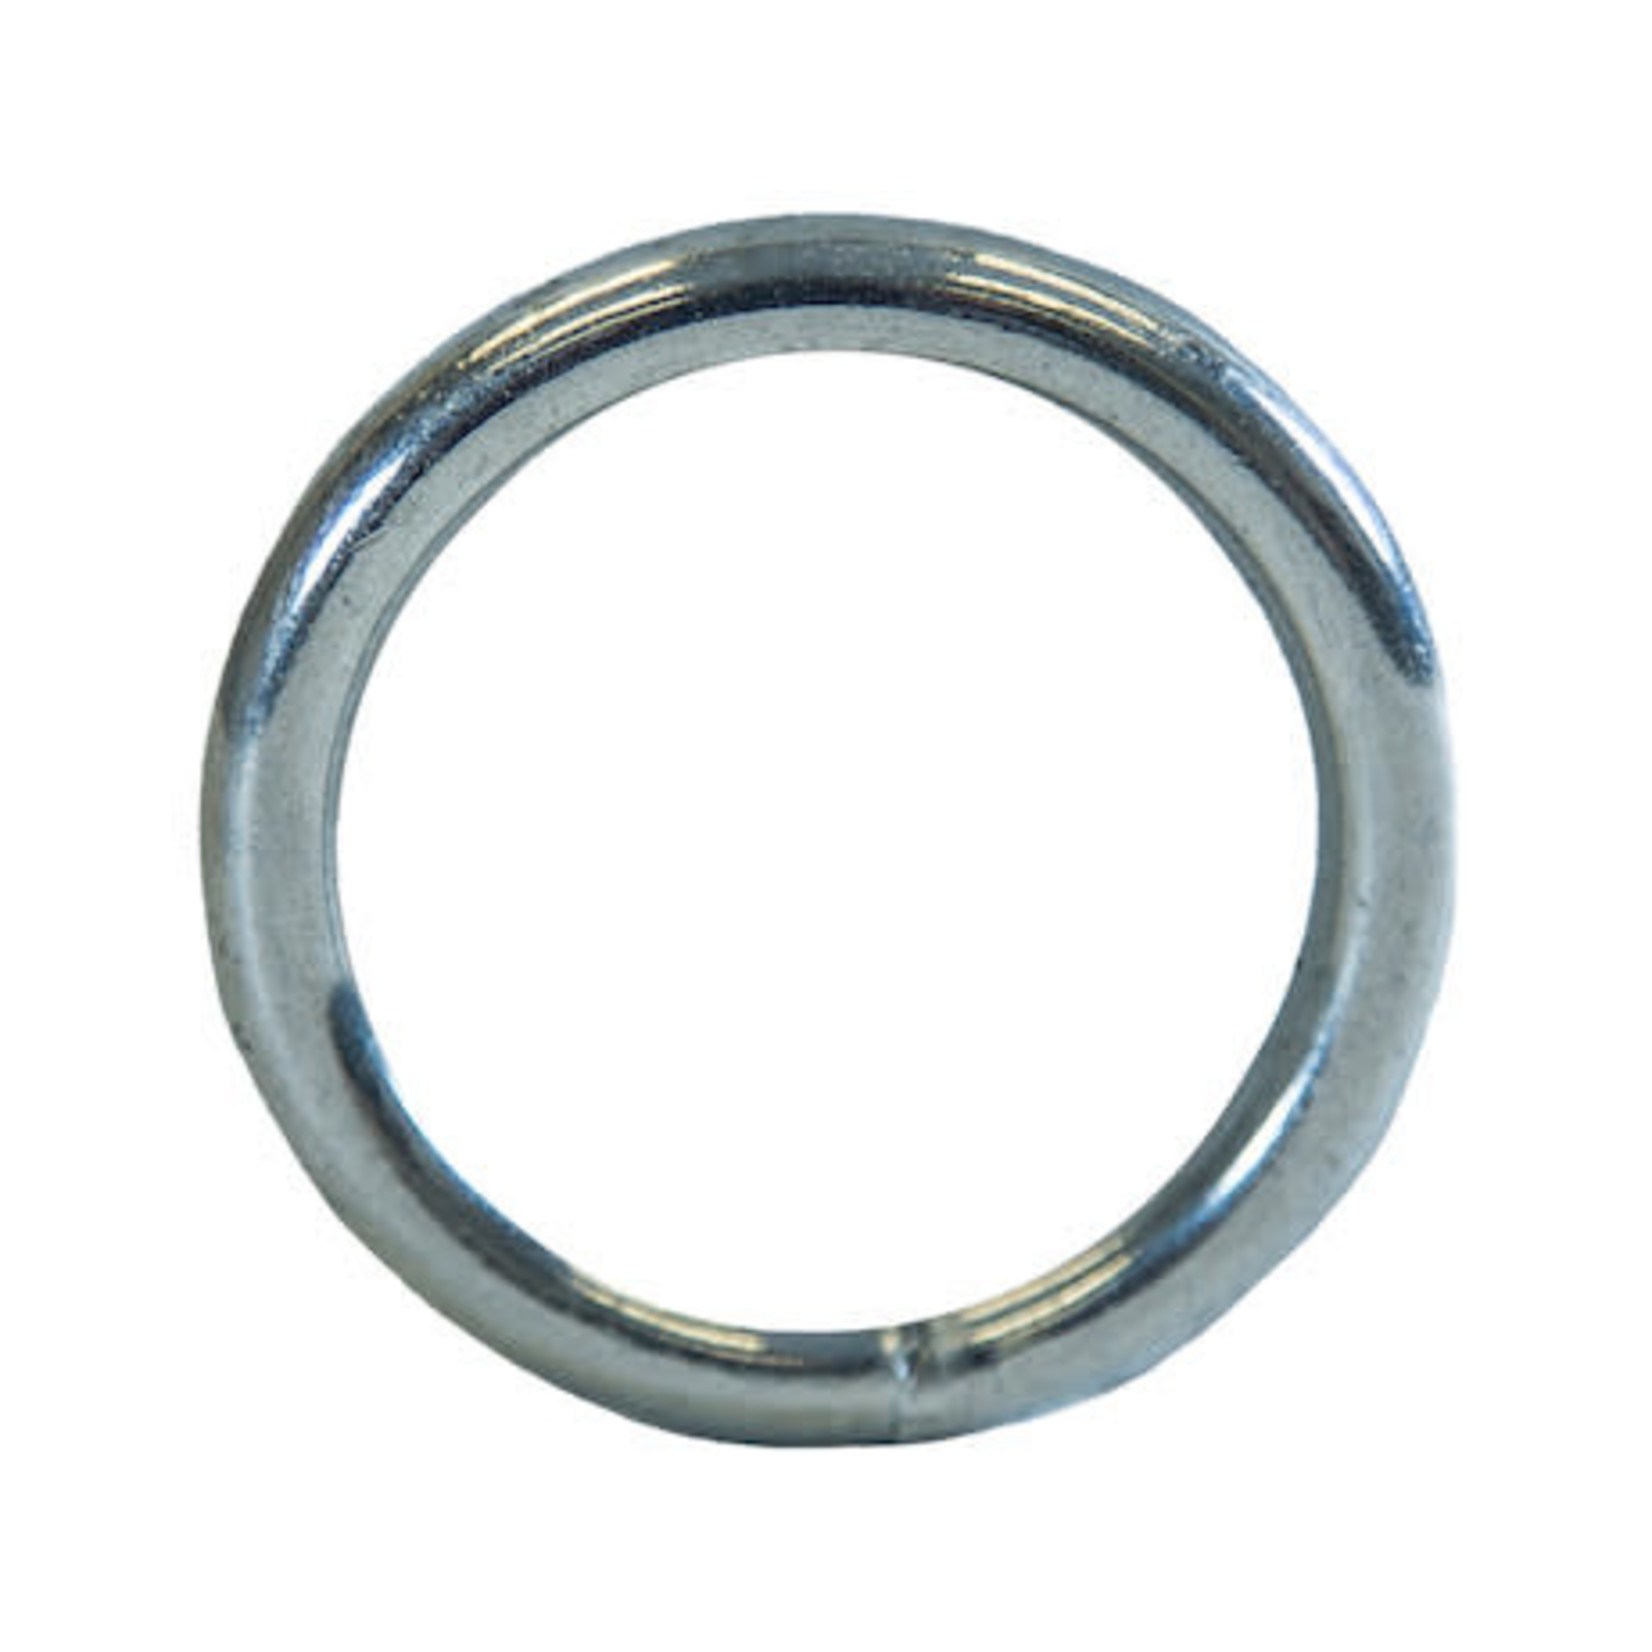 SAM SAM Shoe Spacer-Replaces Fisher #307-1